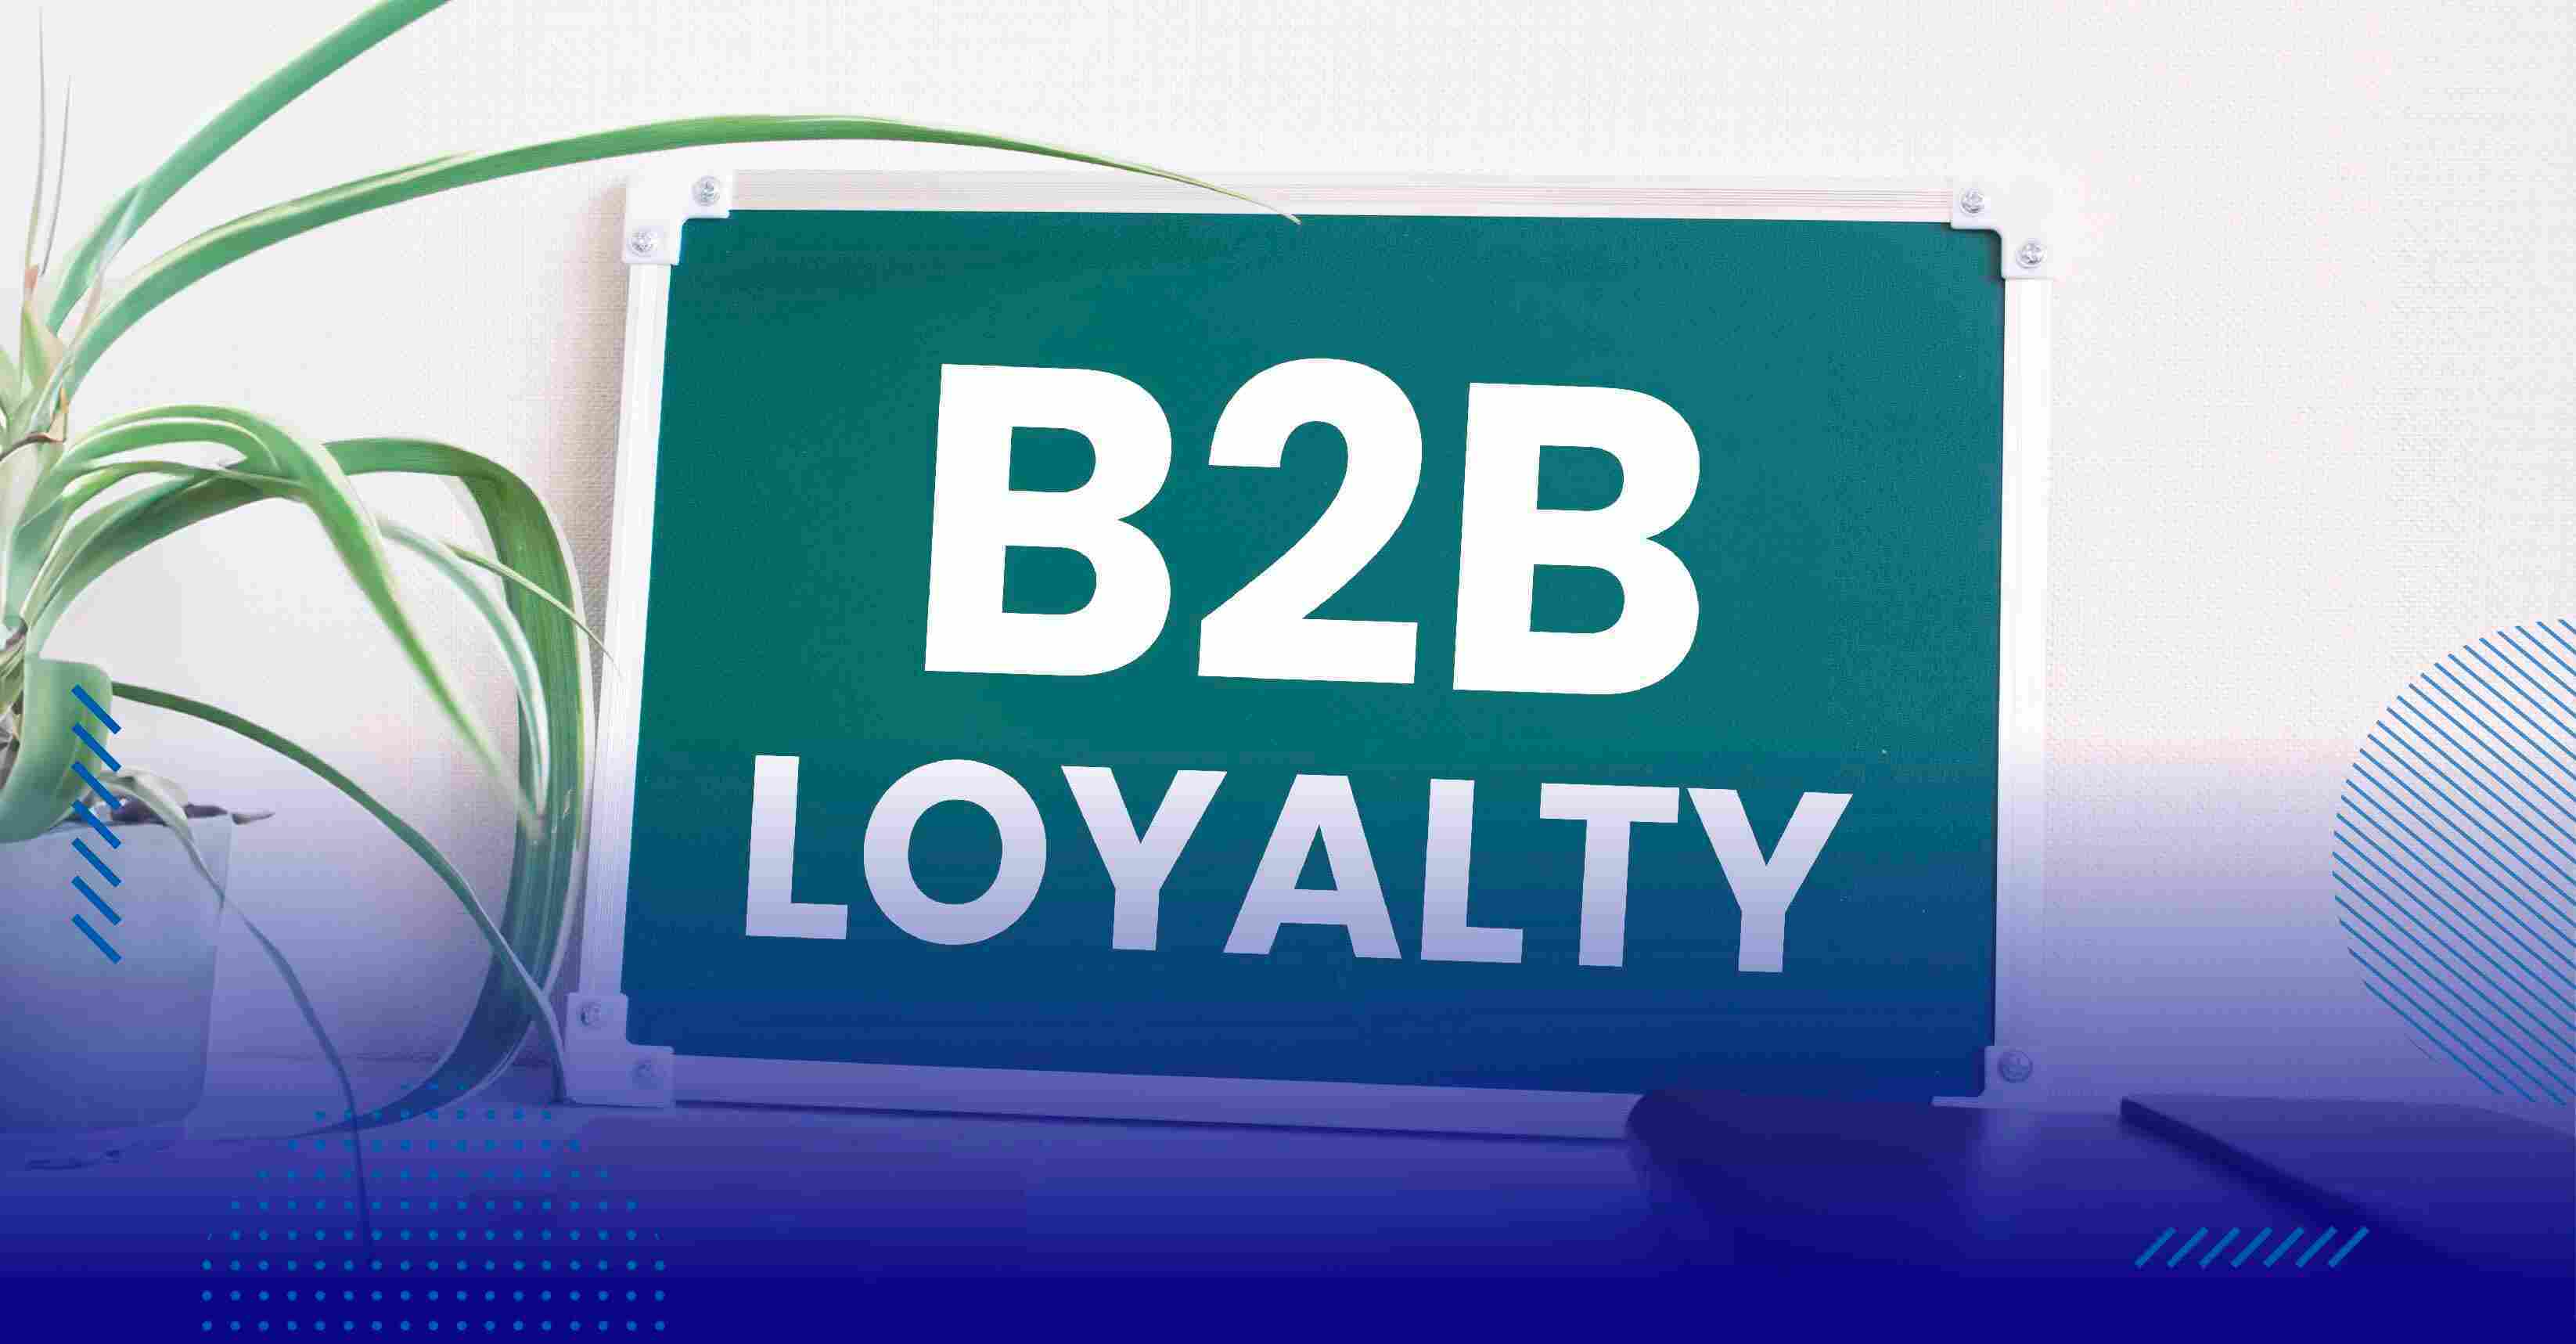 Engagement Killers; Common Mistakes that Sabotage Your B2B Loyalty Program